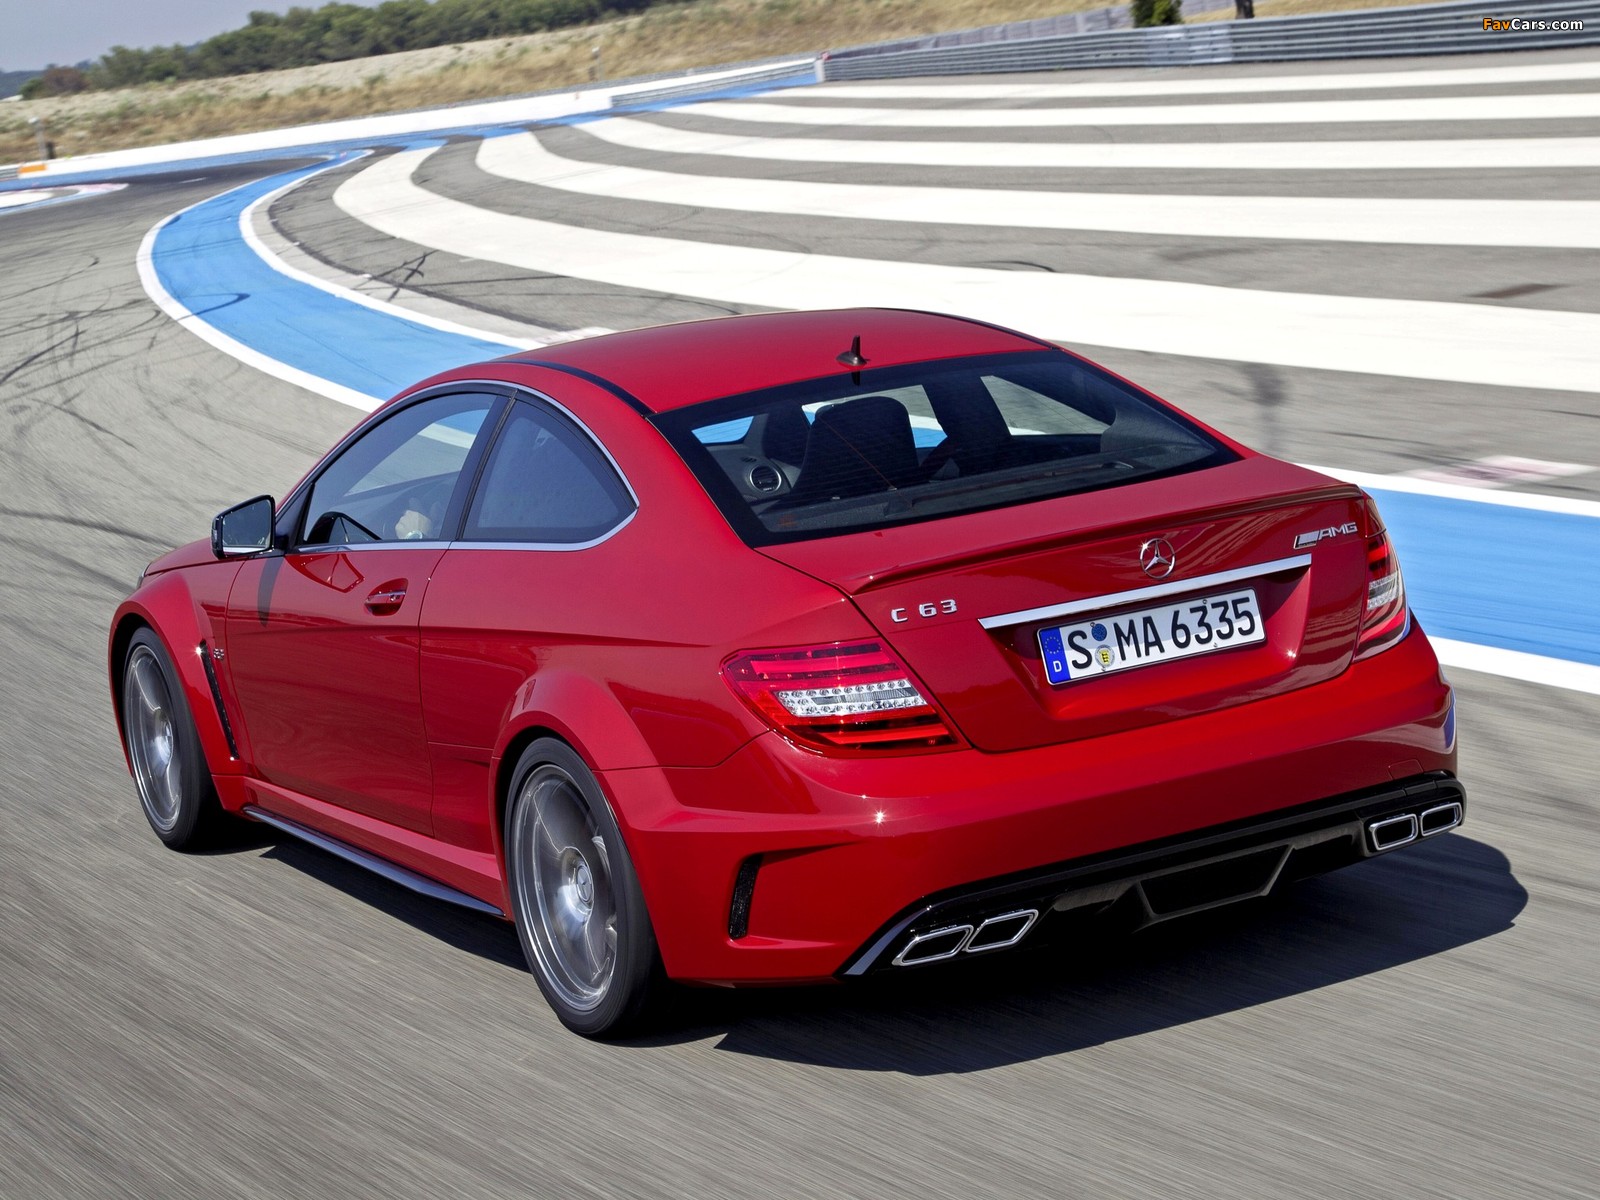 Mercedes-Benz C 63 AMG Black Series Coupe (C204) 2011 pictures (1600 x 1200)